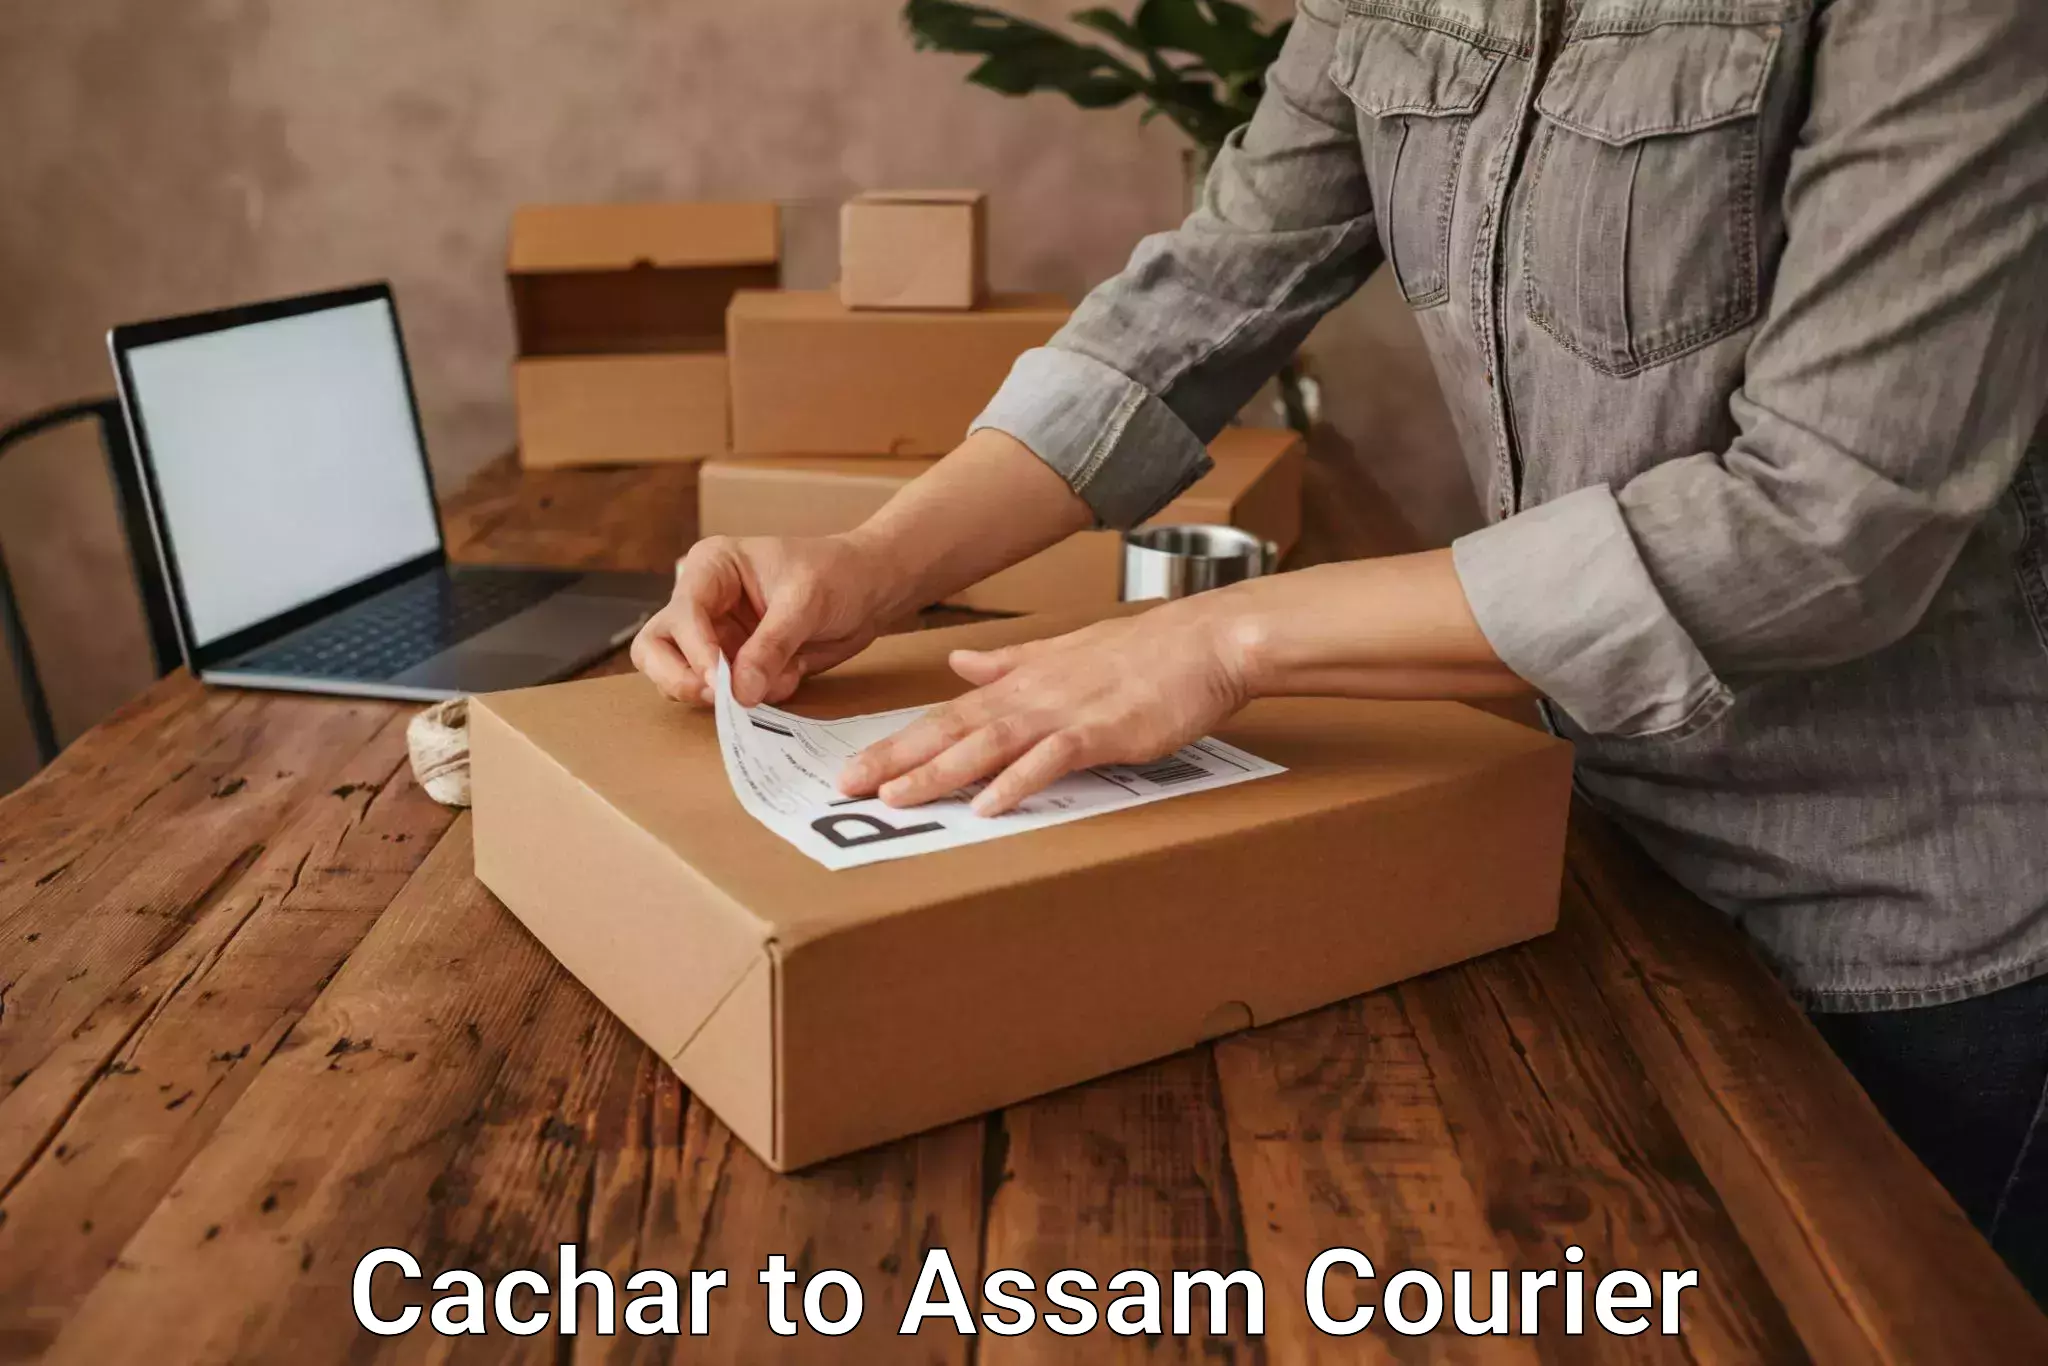 Business shipping needs Cachar to Dhupdhara